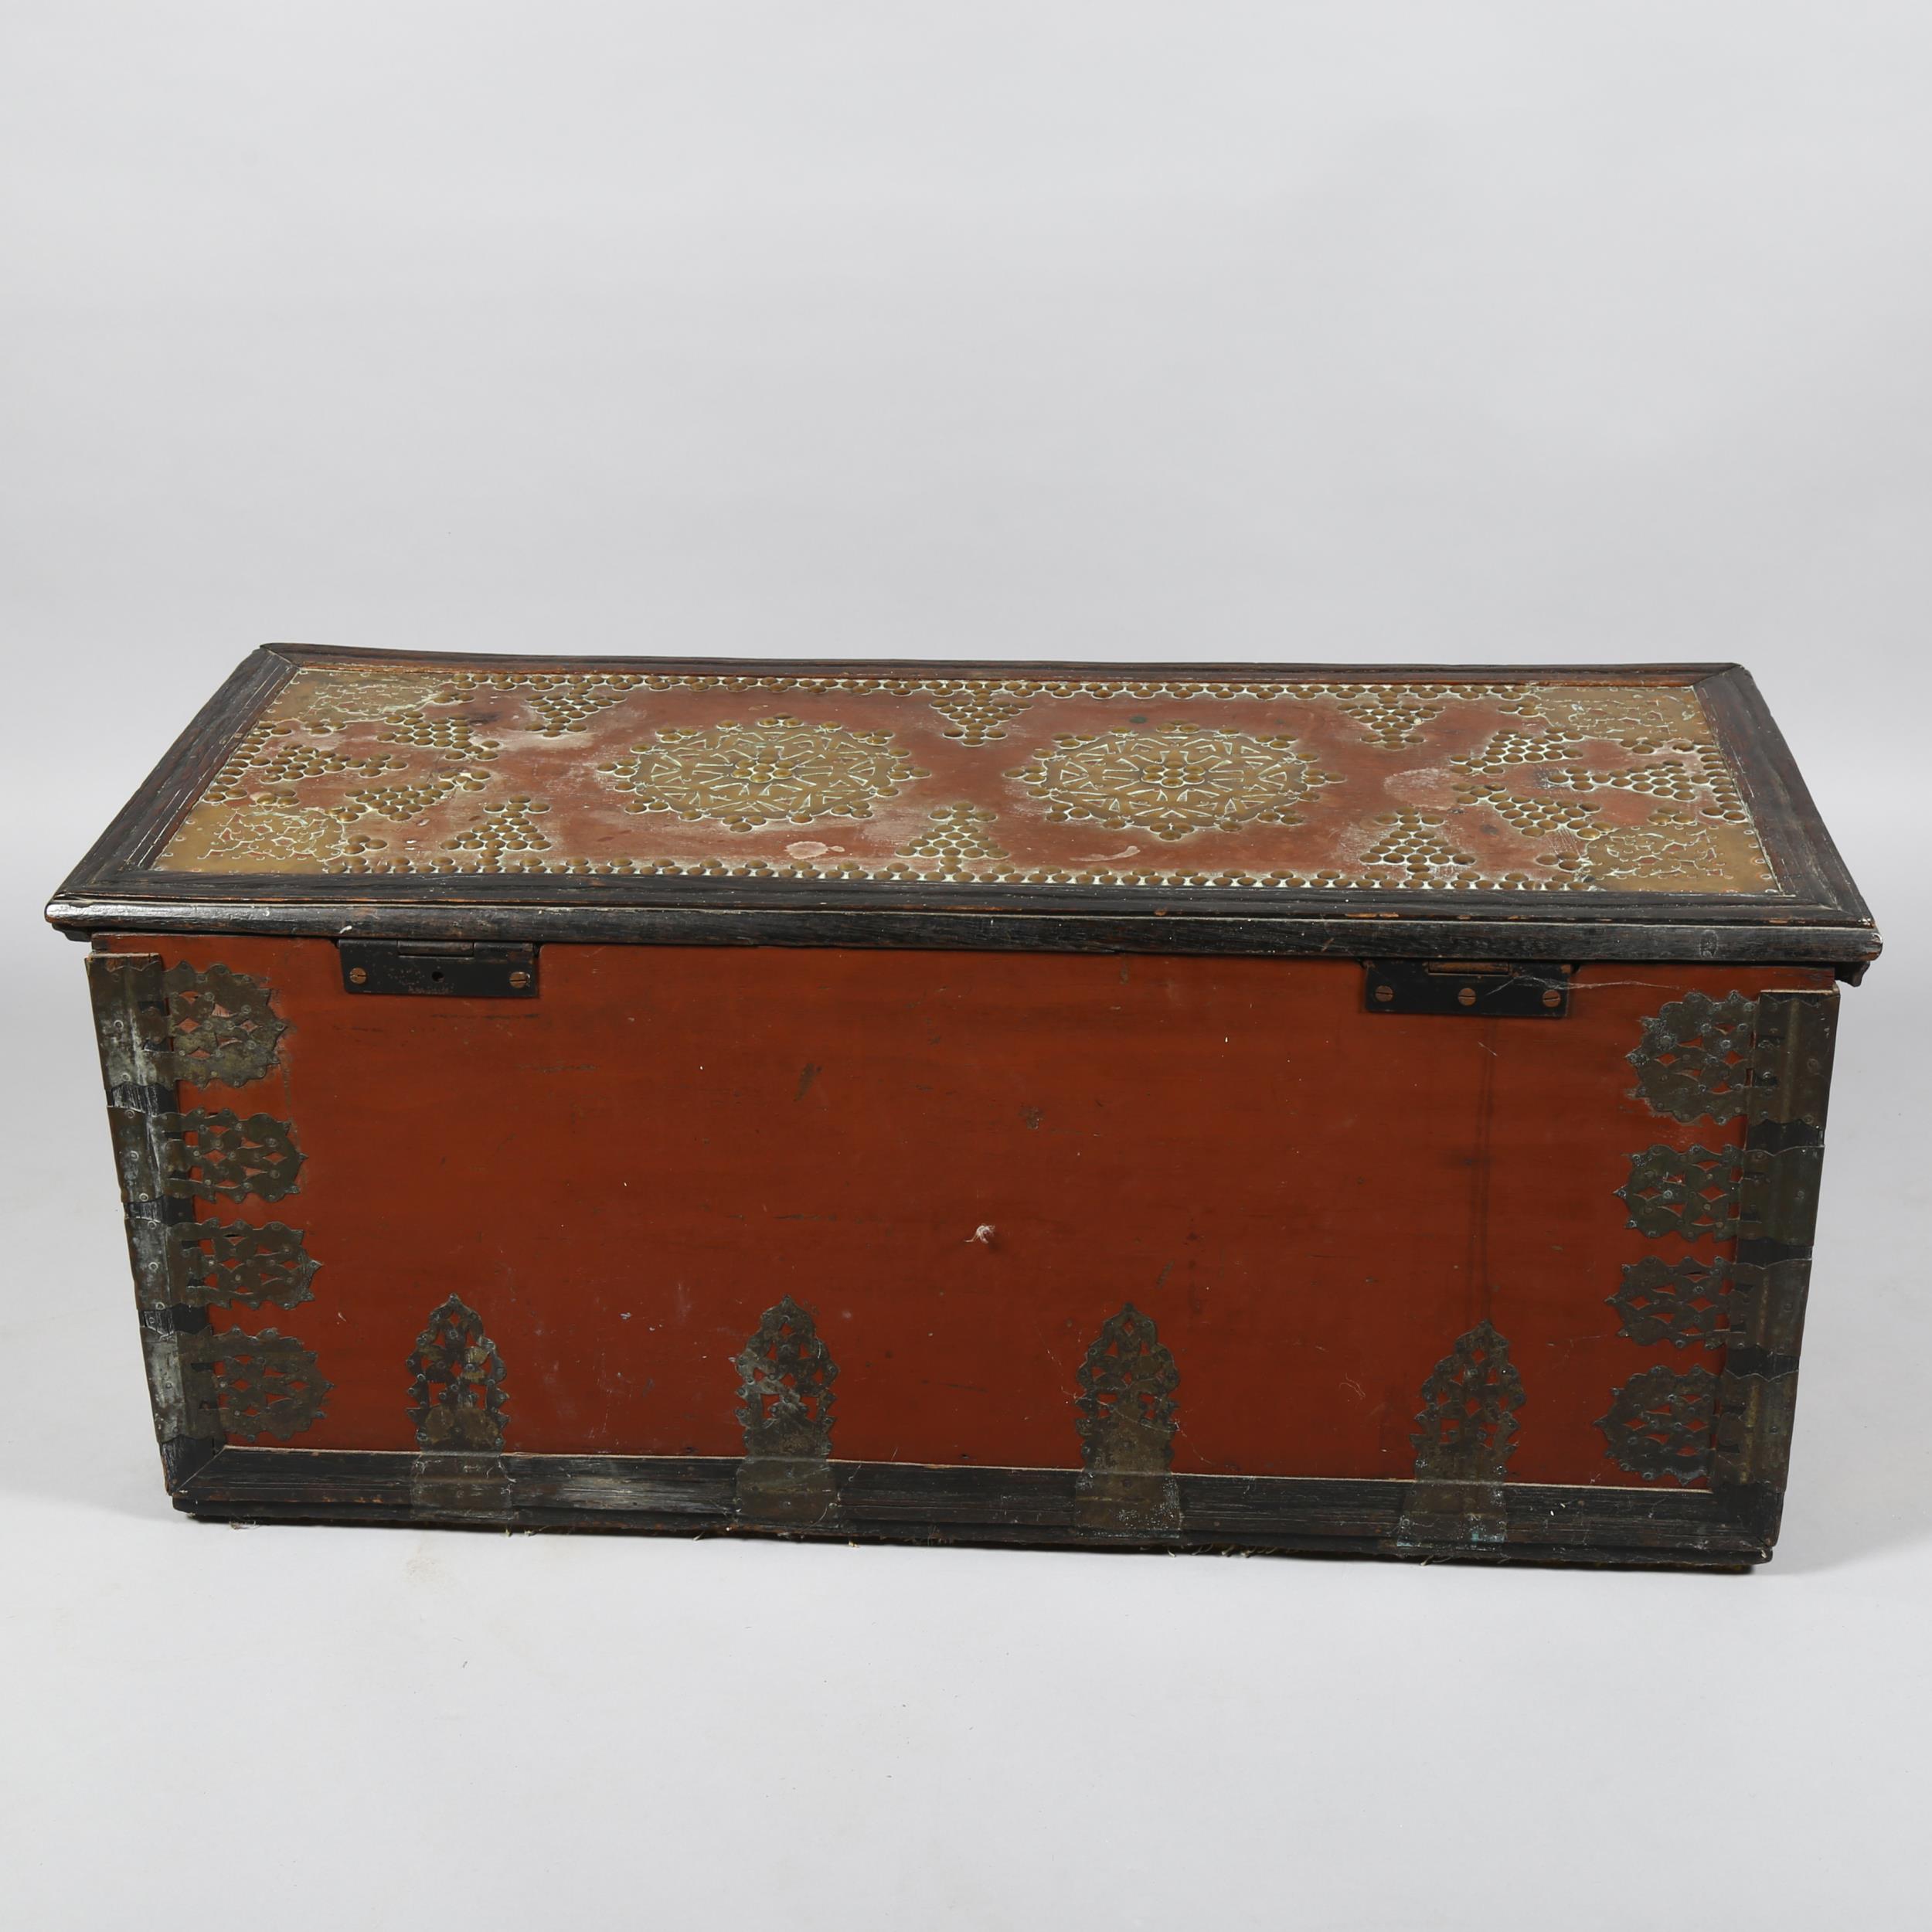 18th century Continental hardwood chest, with allover brass-studded decoration and applied pierced - Image 6 of 6